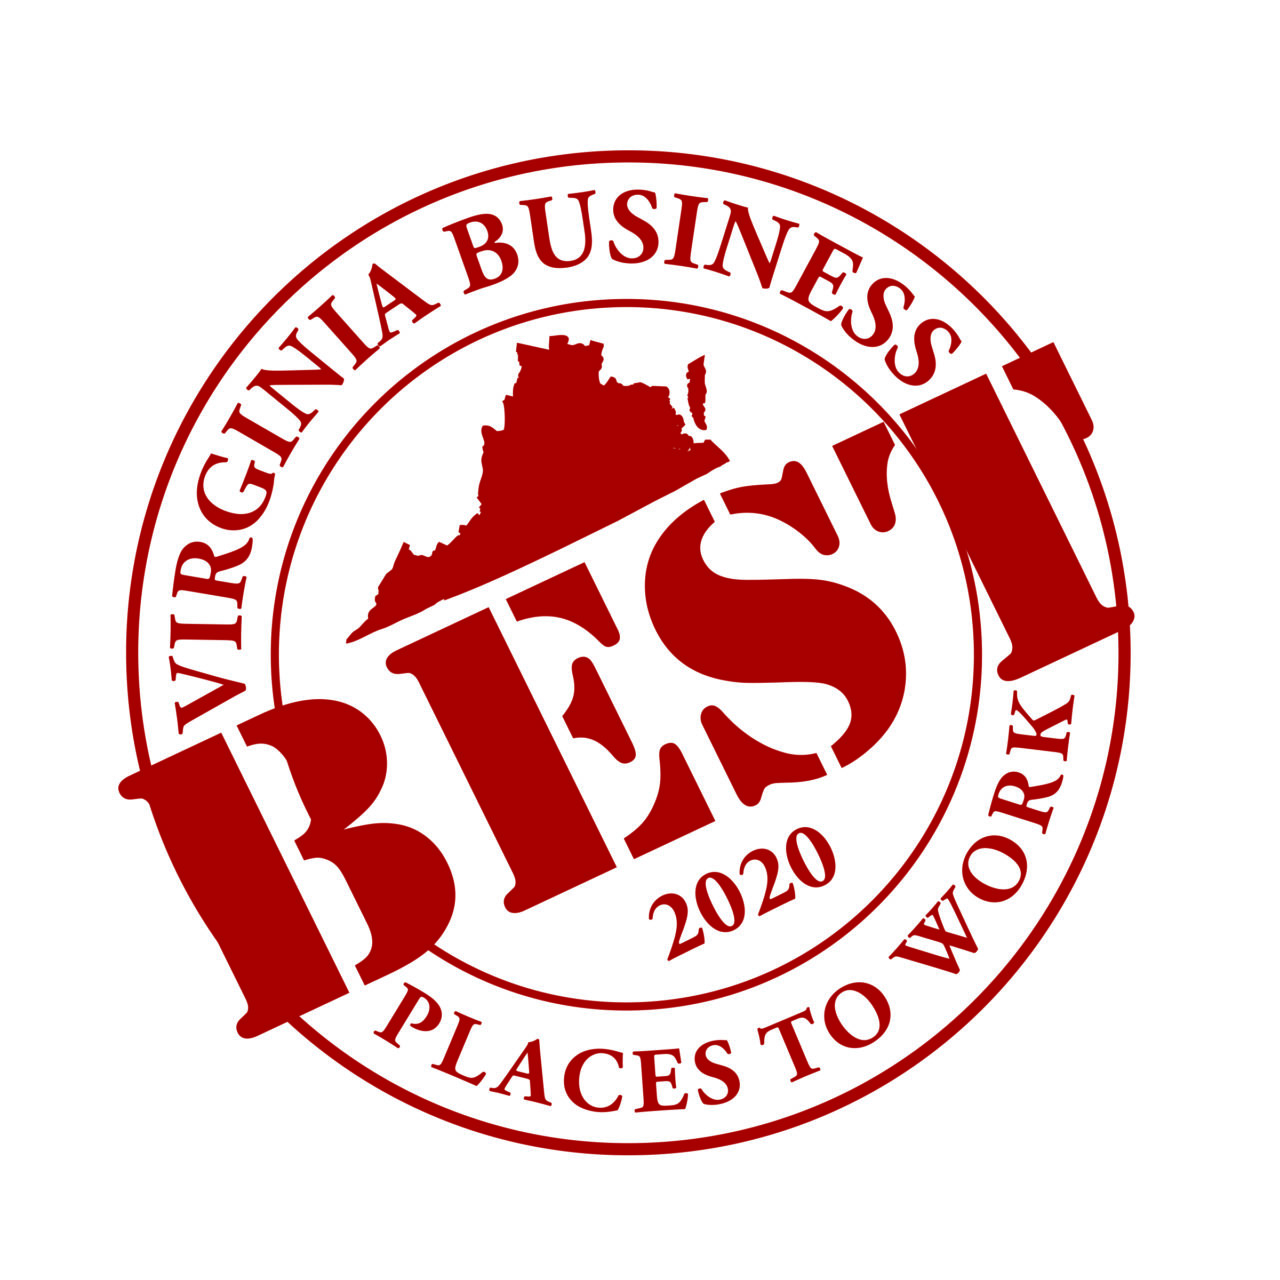 Best place to work in Virginia